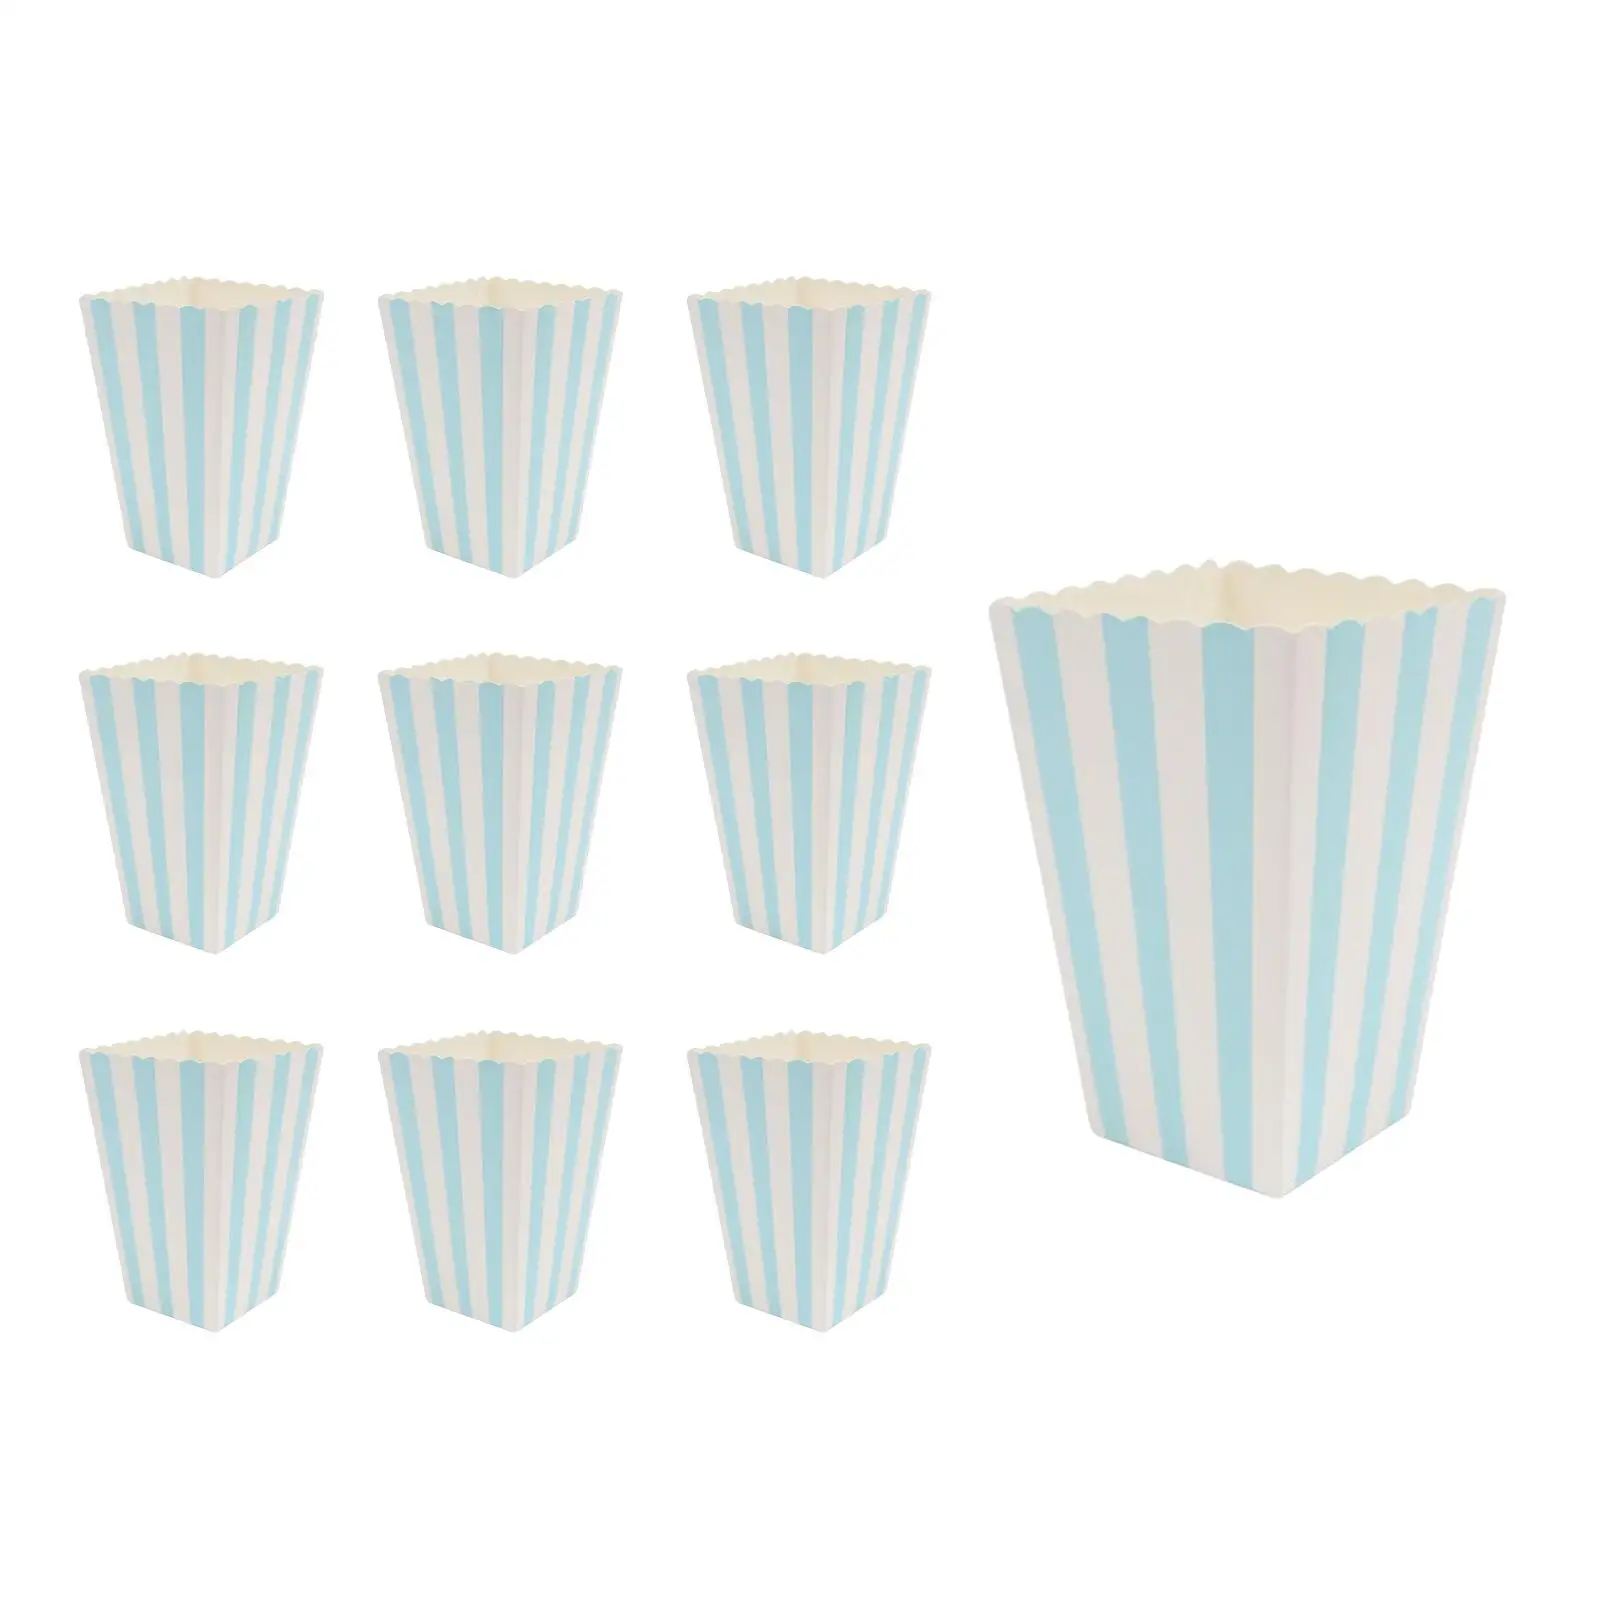 10 Pieces Disposable Tableware Sanck Containers for Favor Party Supplies